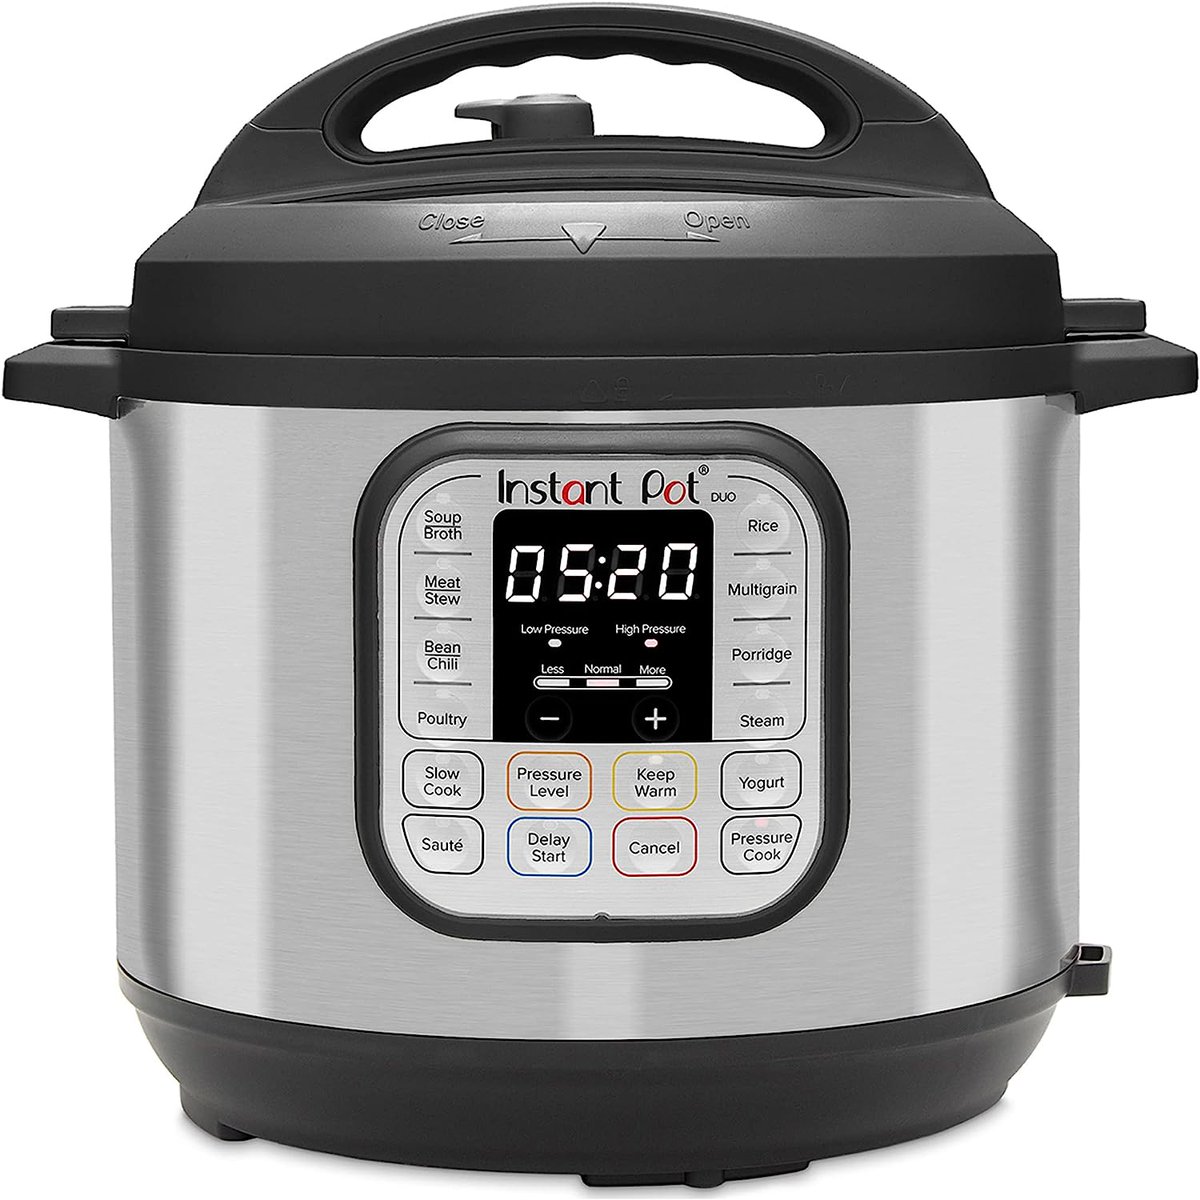 Best Instant Pot Duo | Top 4 Chosen for You! Read Full Review Here: topteneverworld.com/instant-pot-du… #RiceCooker #RiceCookers #Cooker #Cookers #bestricescooker #bestricescookers #InstantPotDuo #InstantPotDuoPlus